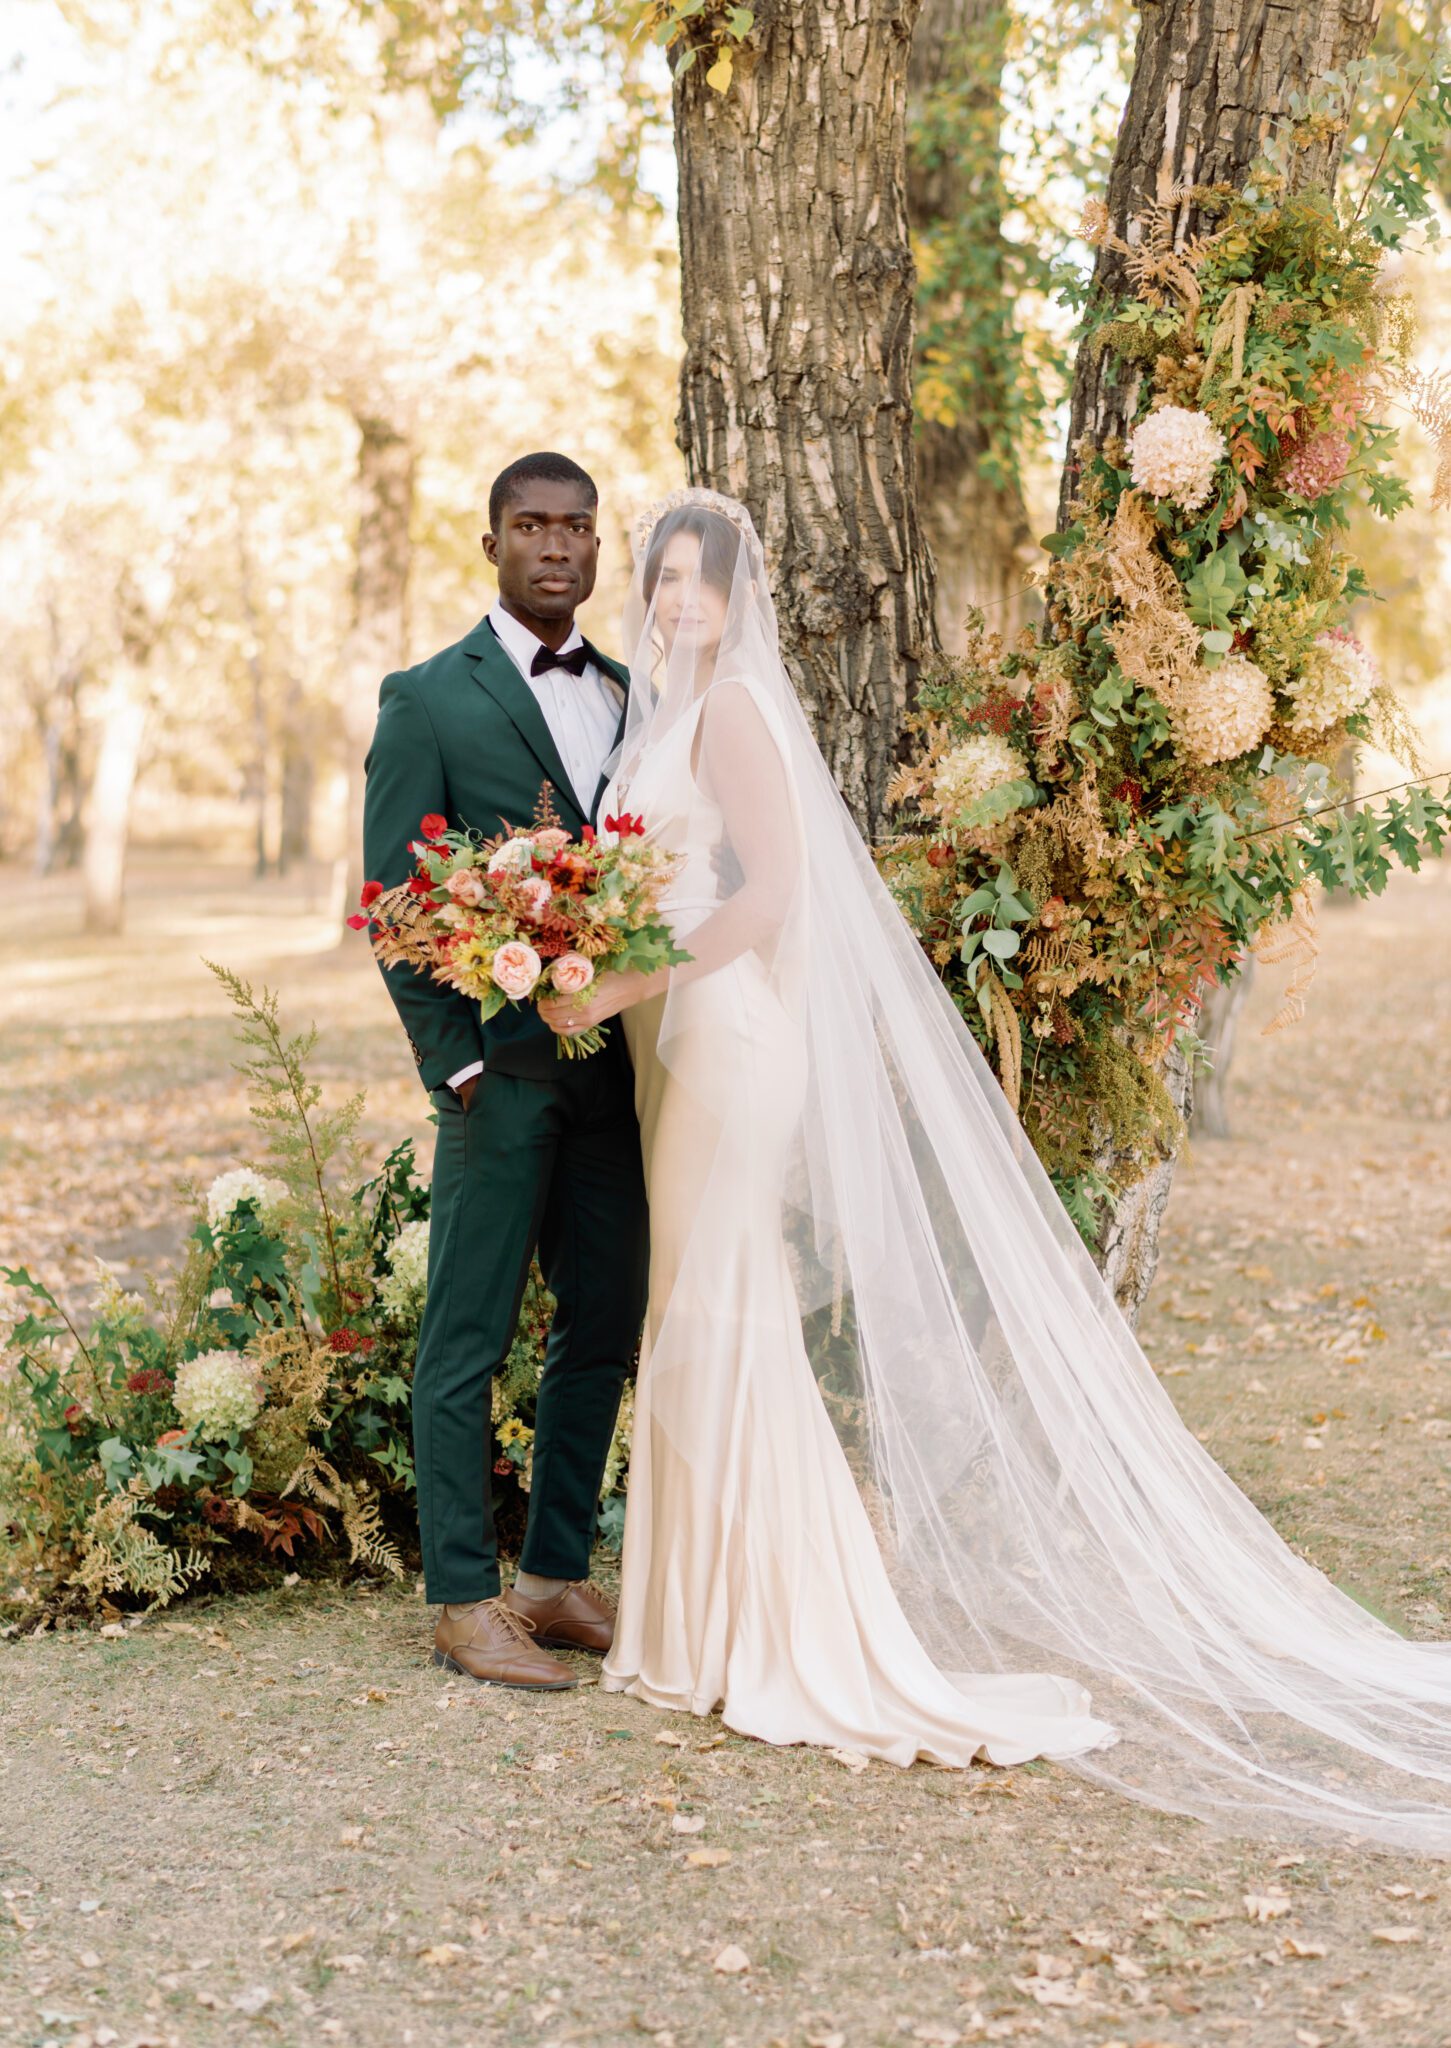 Fine art wedding photography by Kaity Body. Fall inspired wedding featuring emerald green suit and satin bridal gown with lace detail. Long elegant veil from Lovenote Bride. 